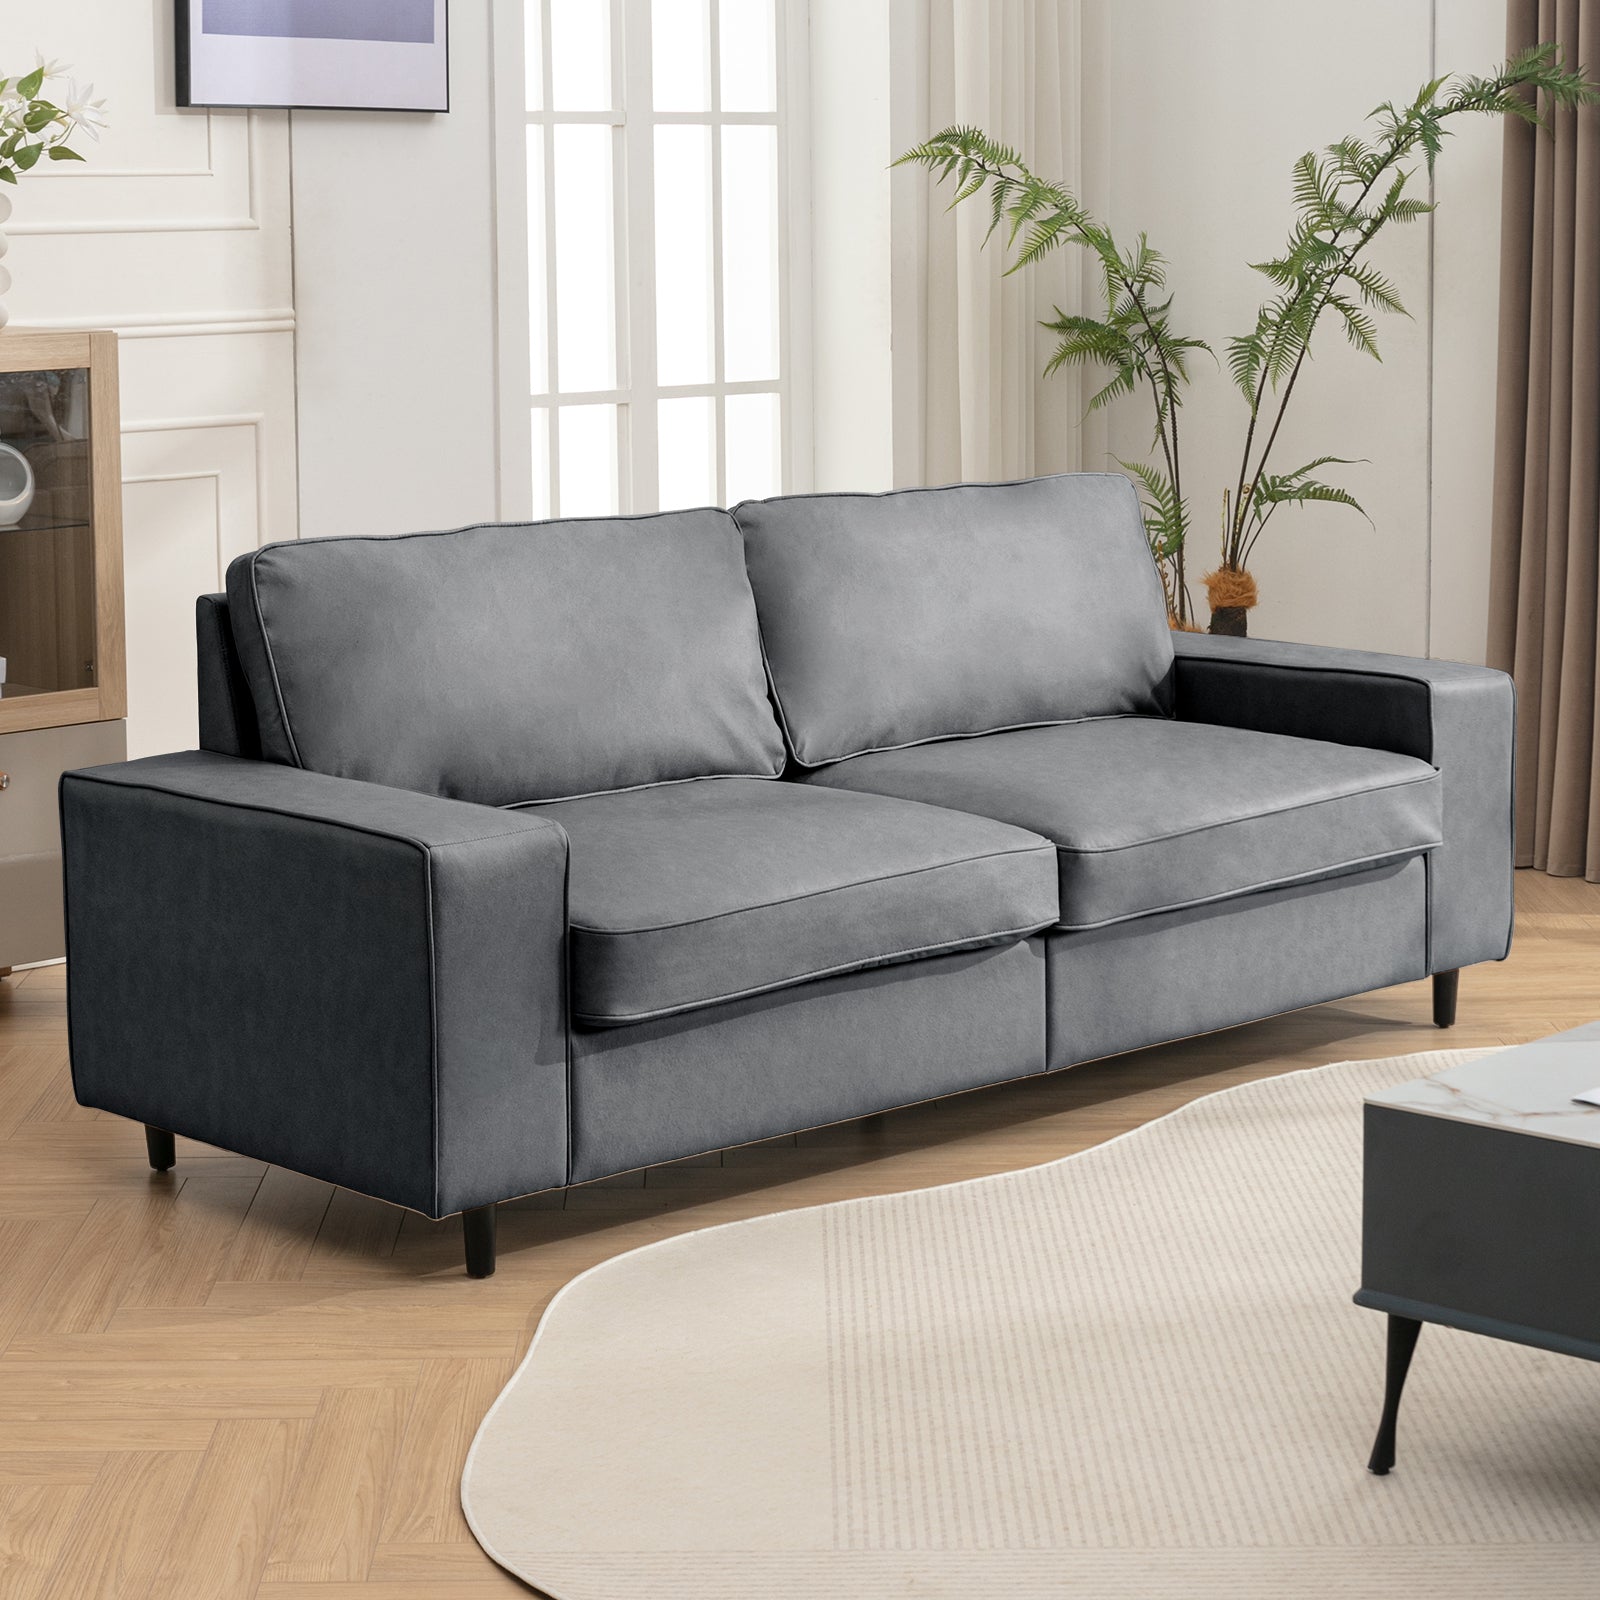 Mjkone 88'' Sectional Loveseat, Modern Leathaire Sofa Couch, Upholstered 2 Seater Sectional Sofa for Living Room,Small Spaces (Loveseat)